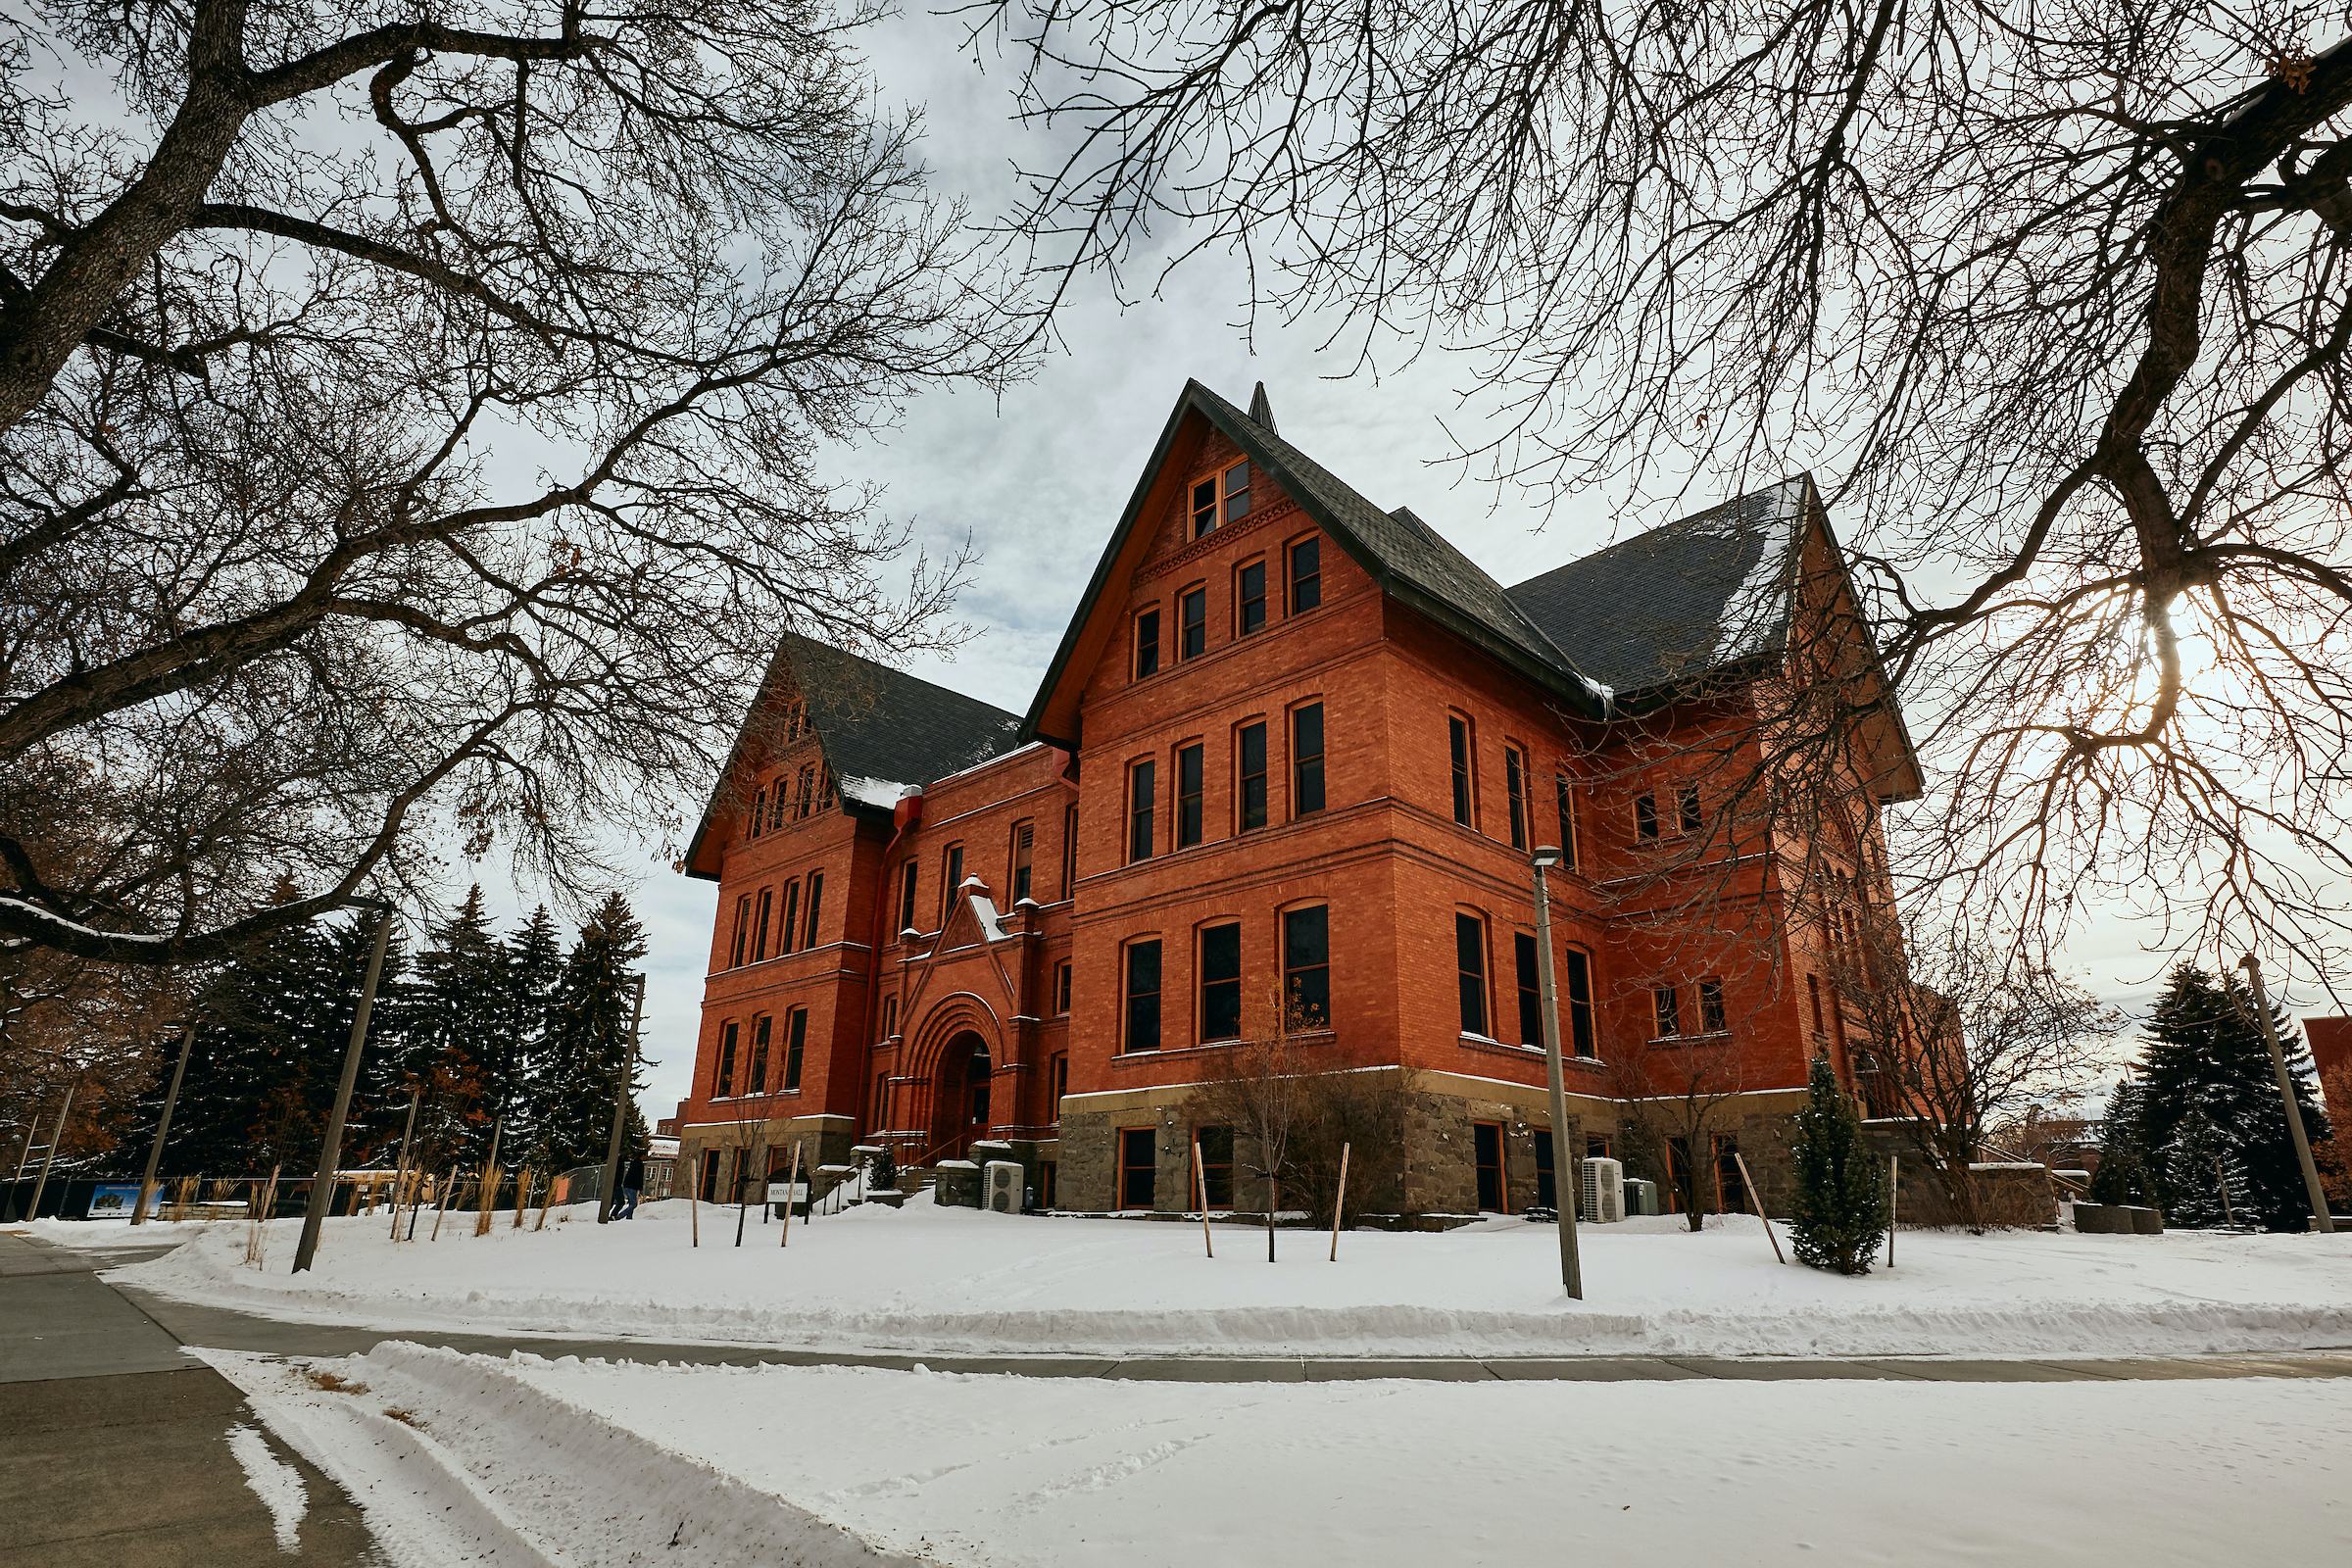 The Montana State University campus during winter break.